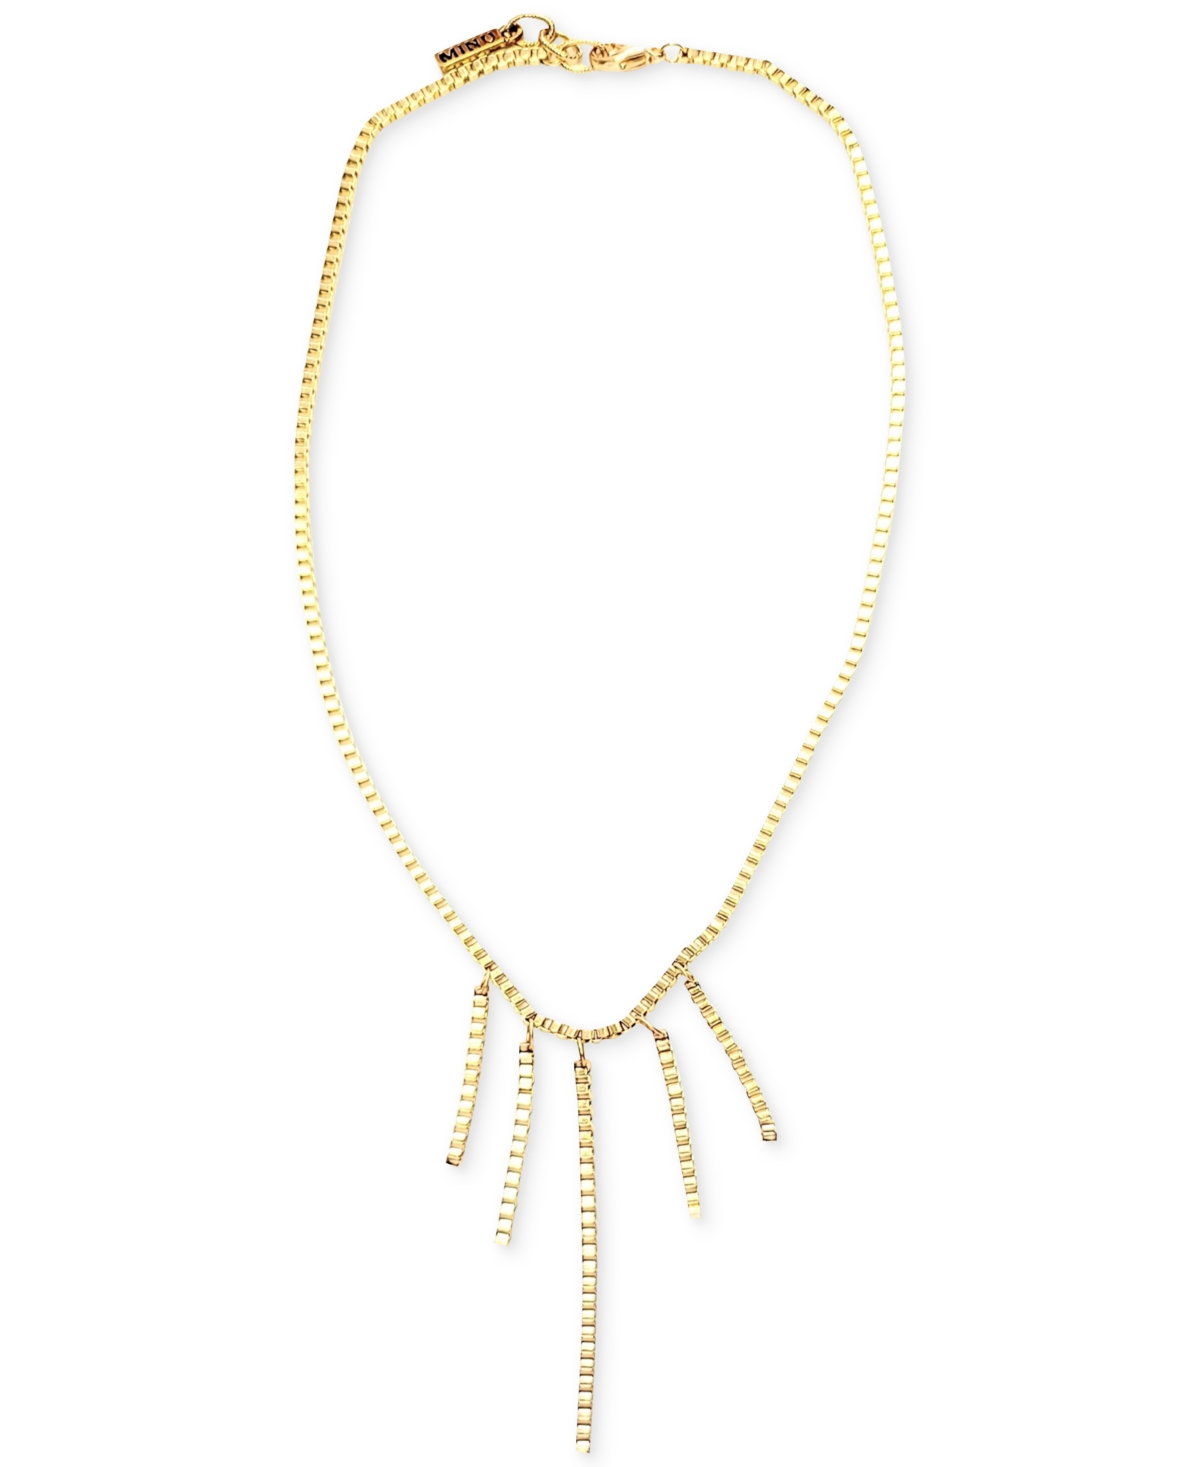 Gold-Tone Box Chain Fringe Statement Necklace, 16" + 1" extender - Gold